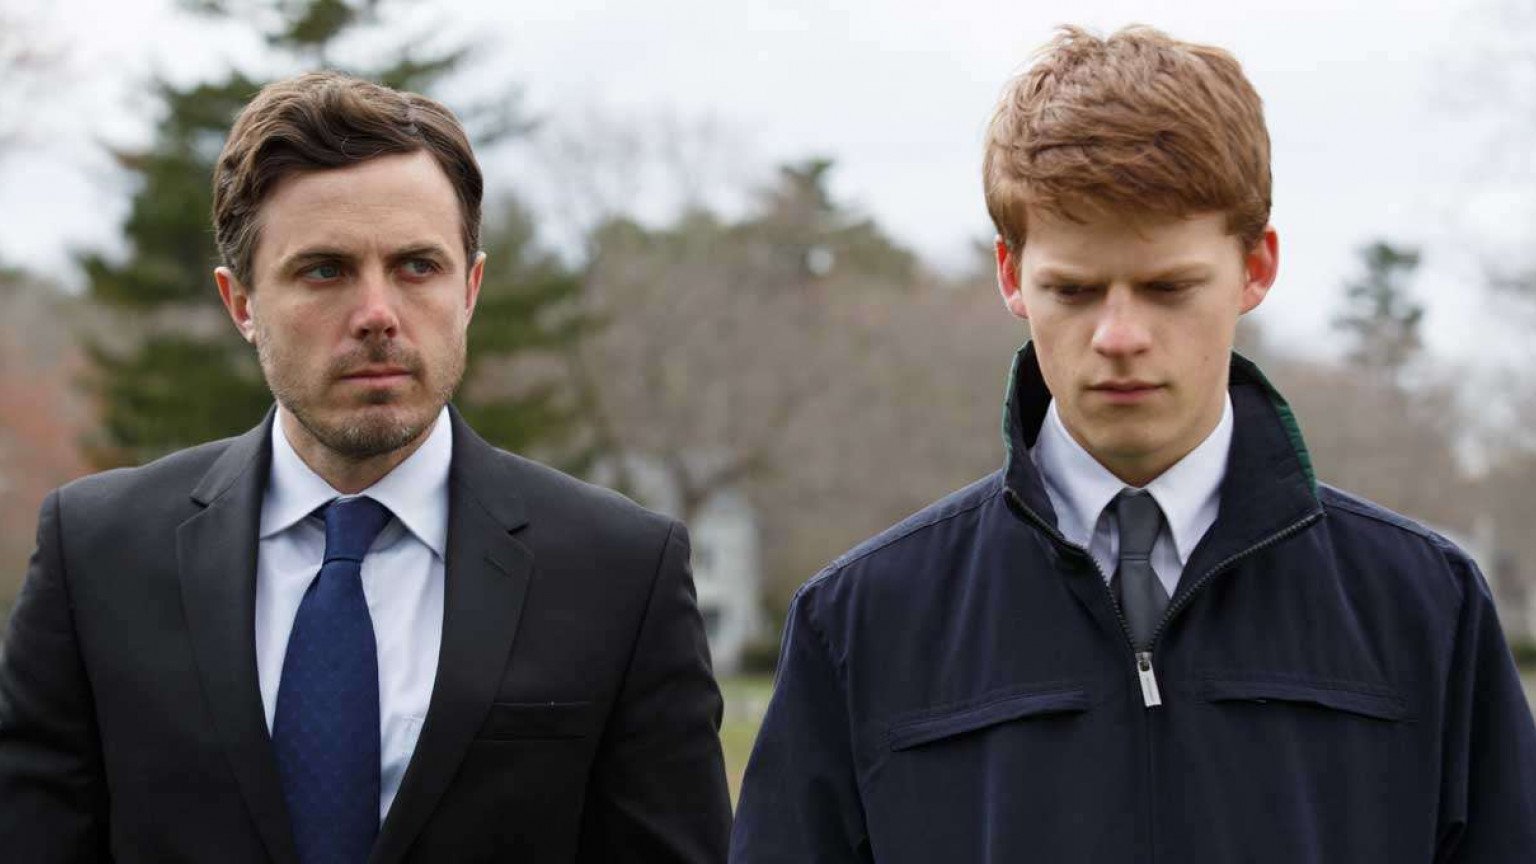 Recensie 'Manchester by the Sea'